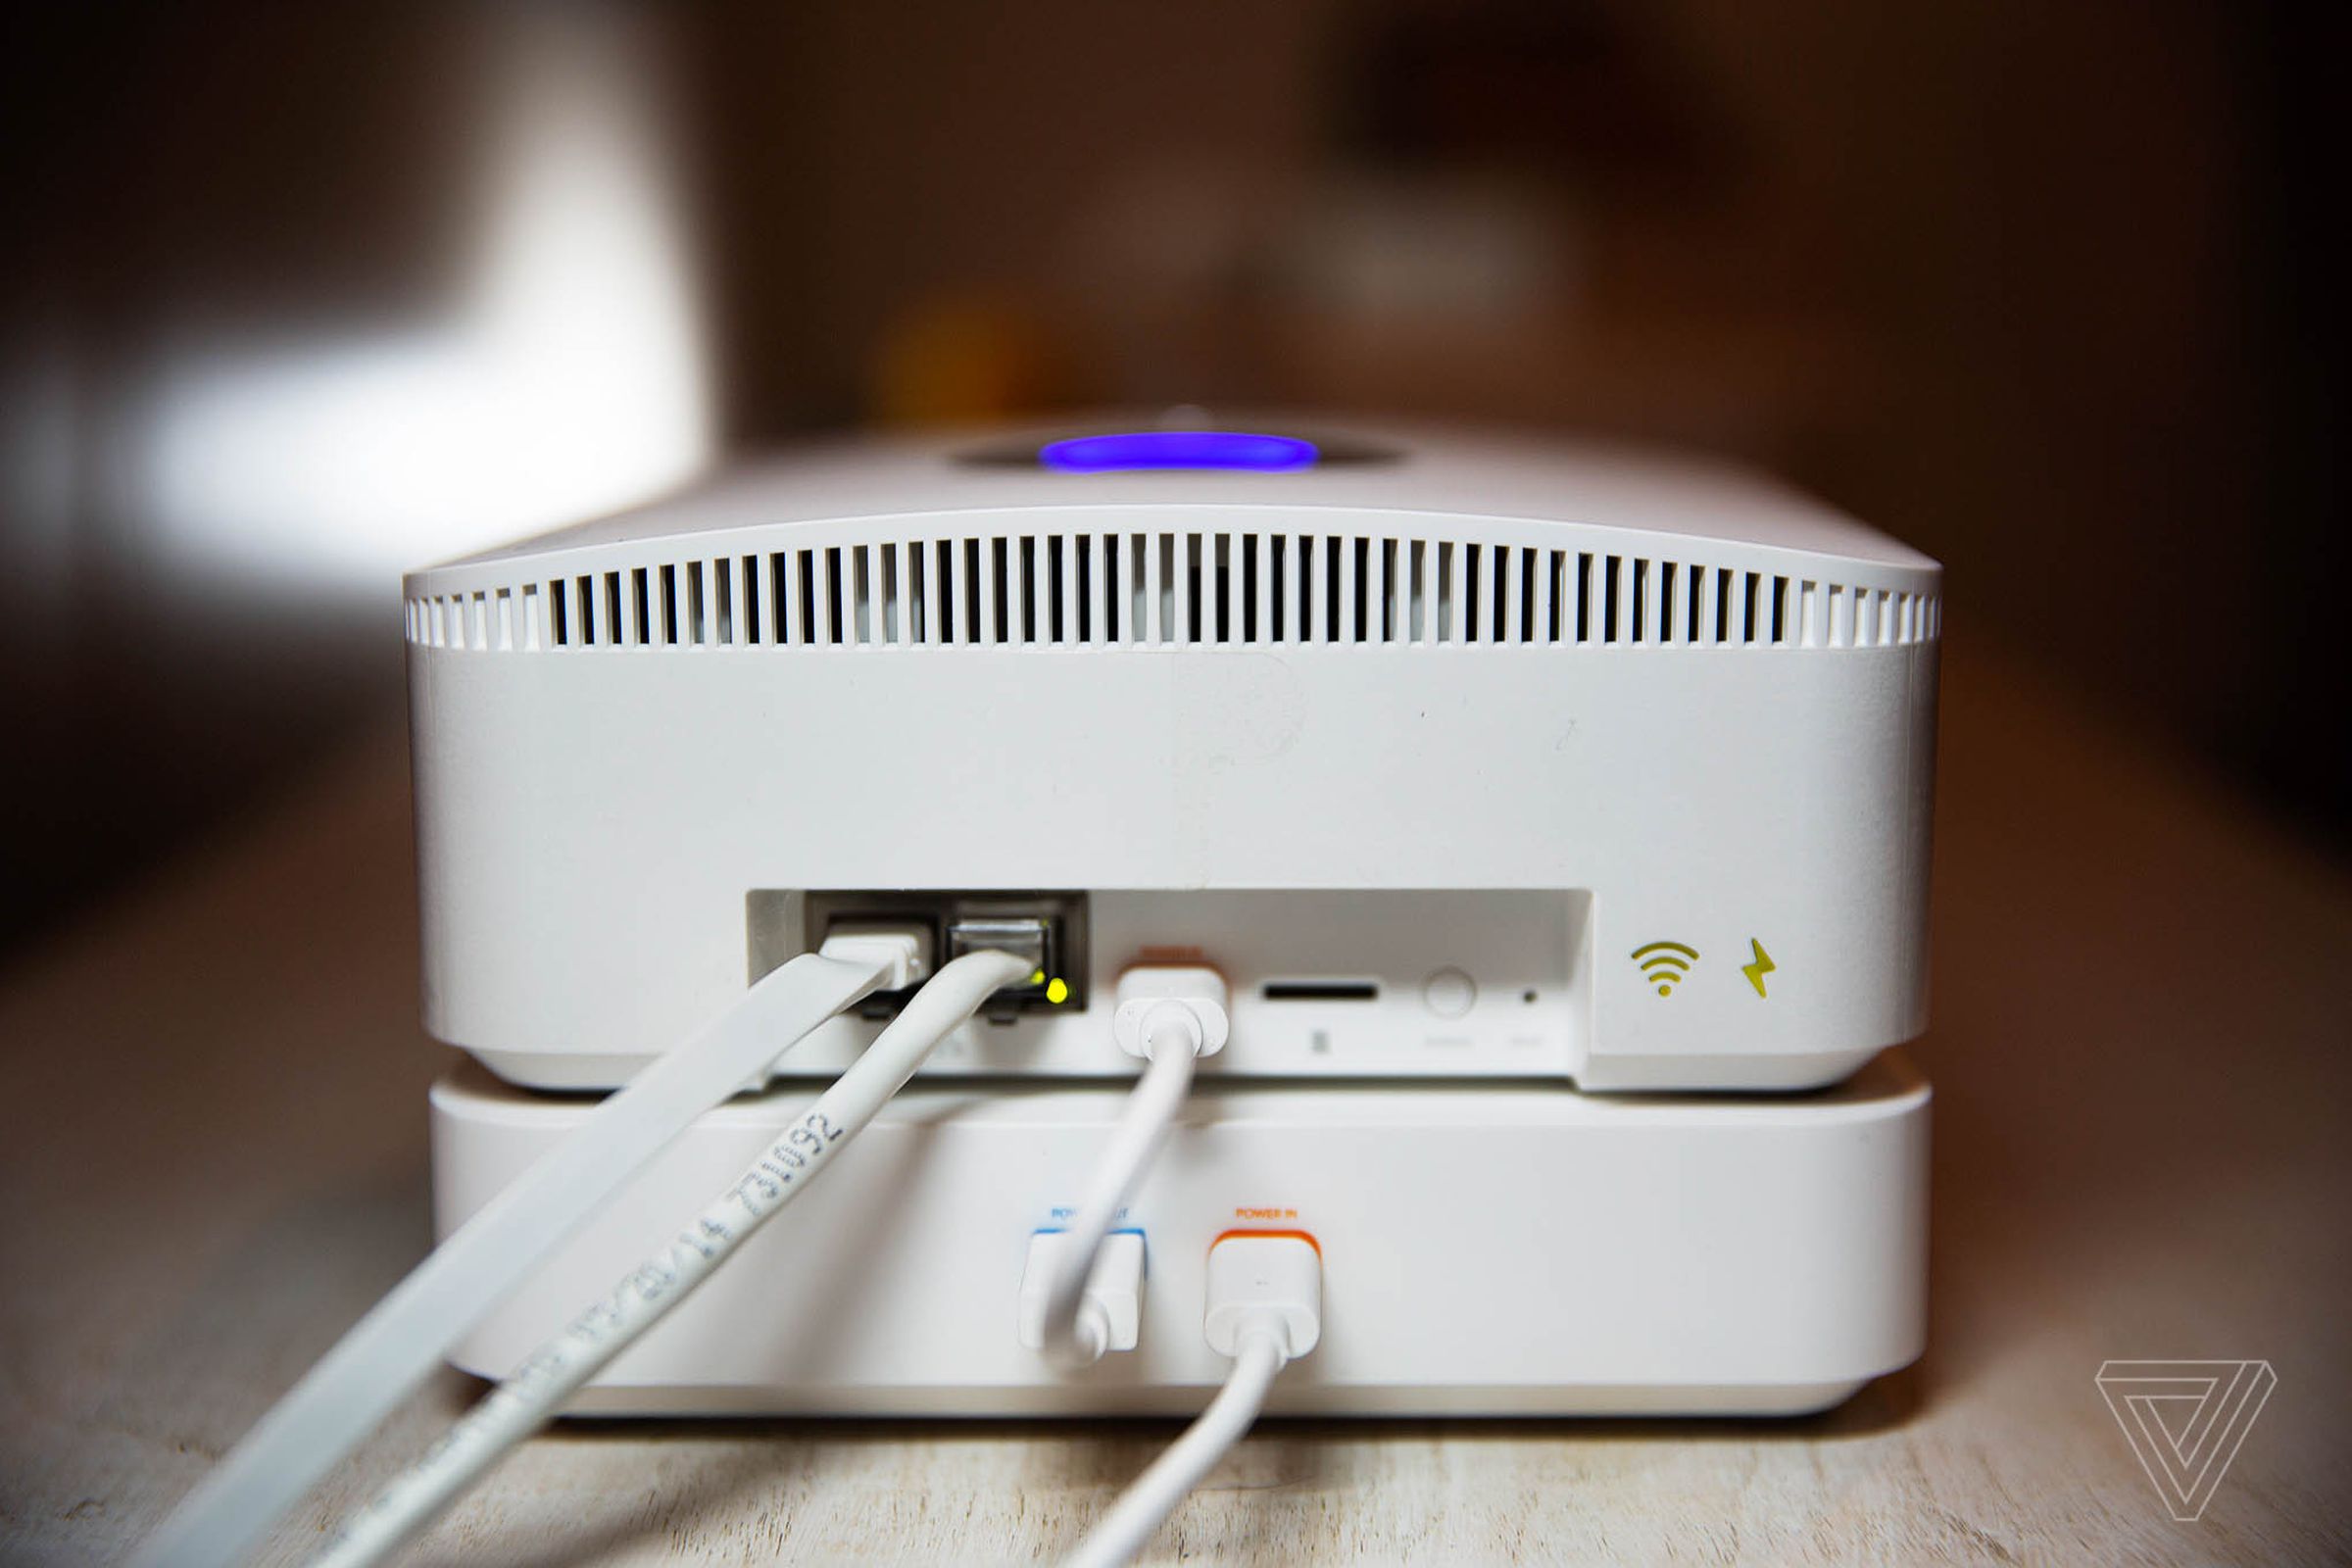 The Ring Alarm Pro has two ethernet ports, a MicroSD card slot, and a USB type-C connector for power. To connect it to a Power Pack you use a color-coded USB Type-C cable. You need to charge the Power Pack with the base station’s cable first, as it doesn’t have its own power supply.